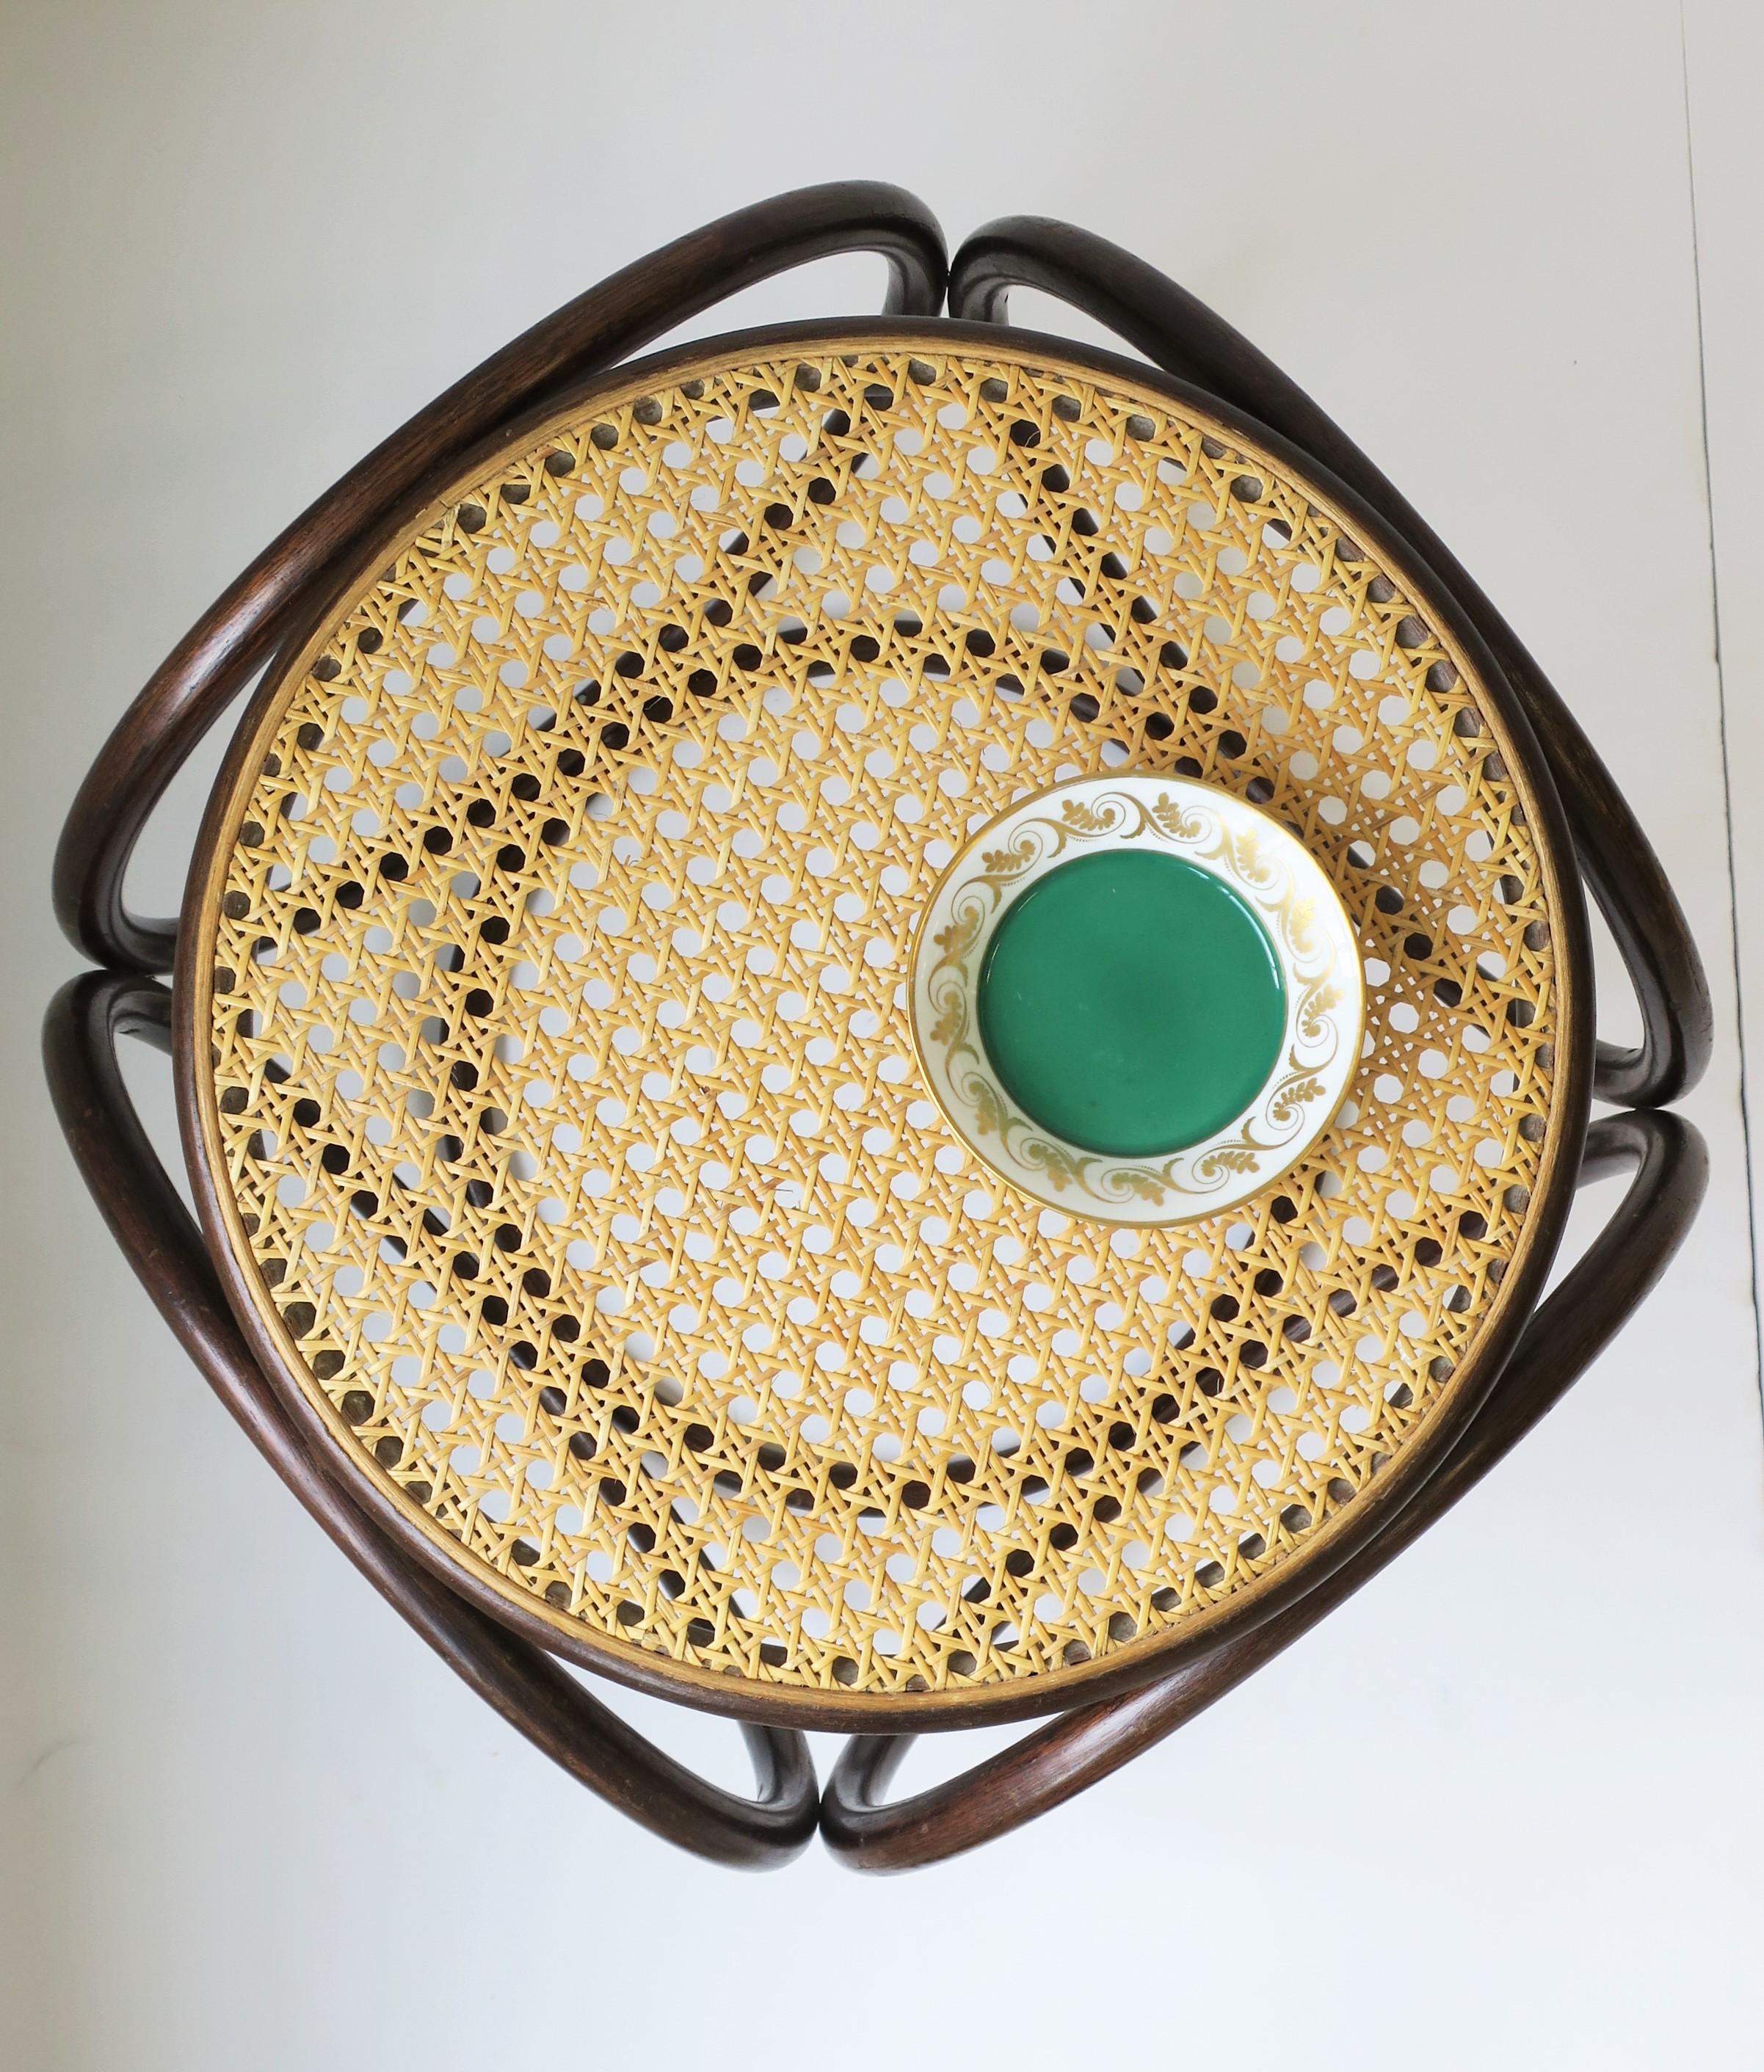 Richard Ginori Italian Porcelain Jewelry Dish in Gold and Green In Good Condition For Sale In New York, NY